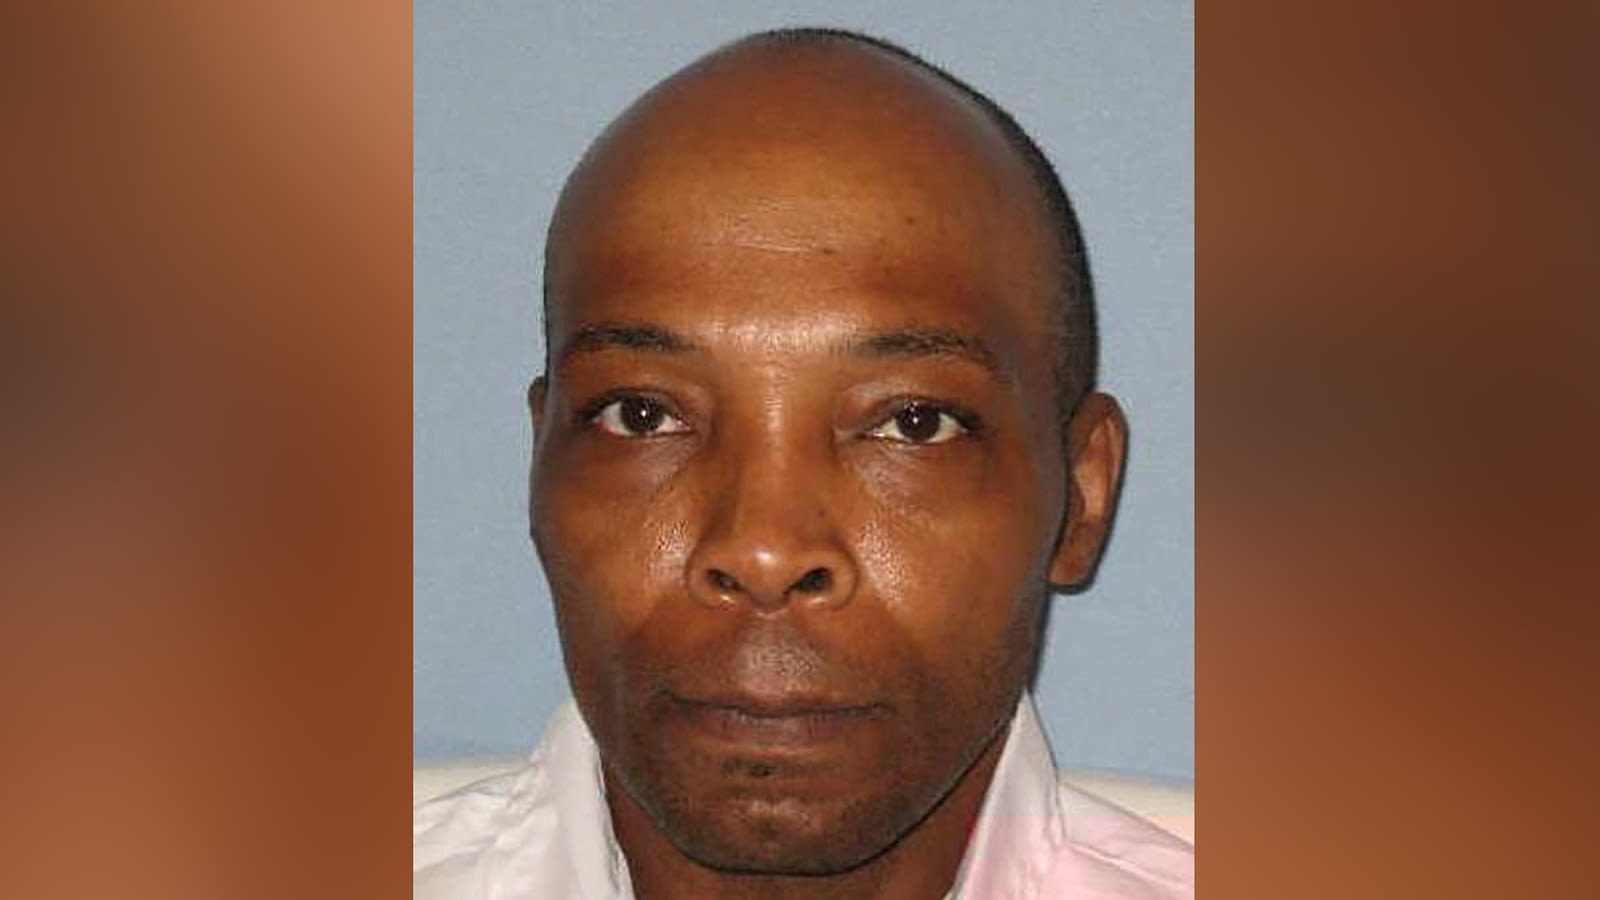 Alabama inmate set to be executed by lethal injection for 1998 murder of delivery driver